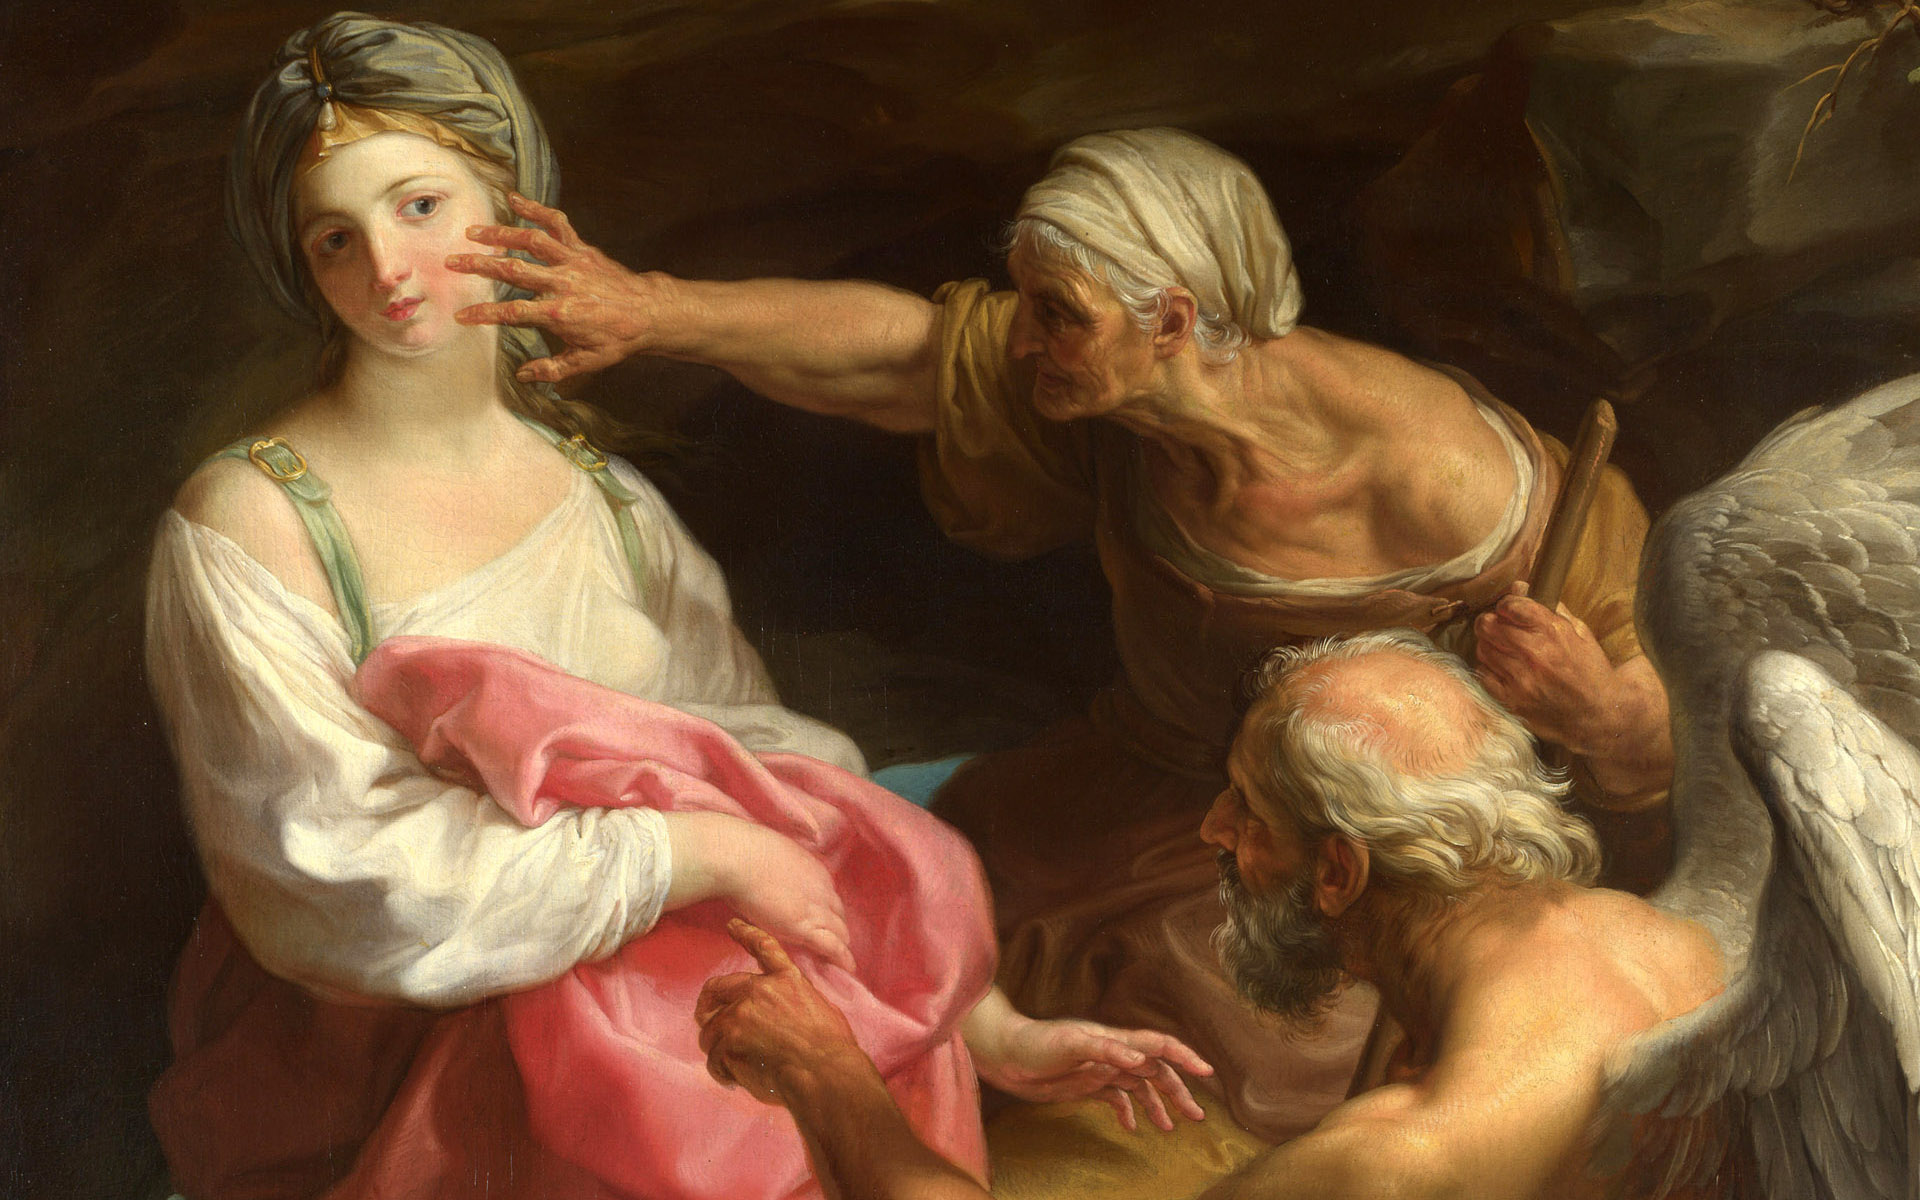 Time orders Old Age to destroy Beauty by Pompeo Girolamo Batoni